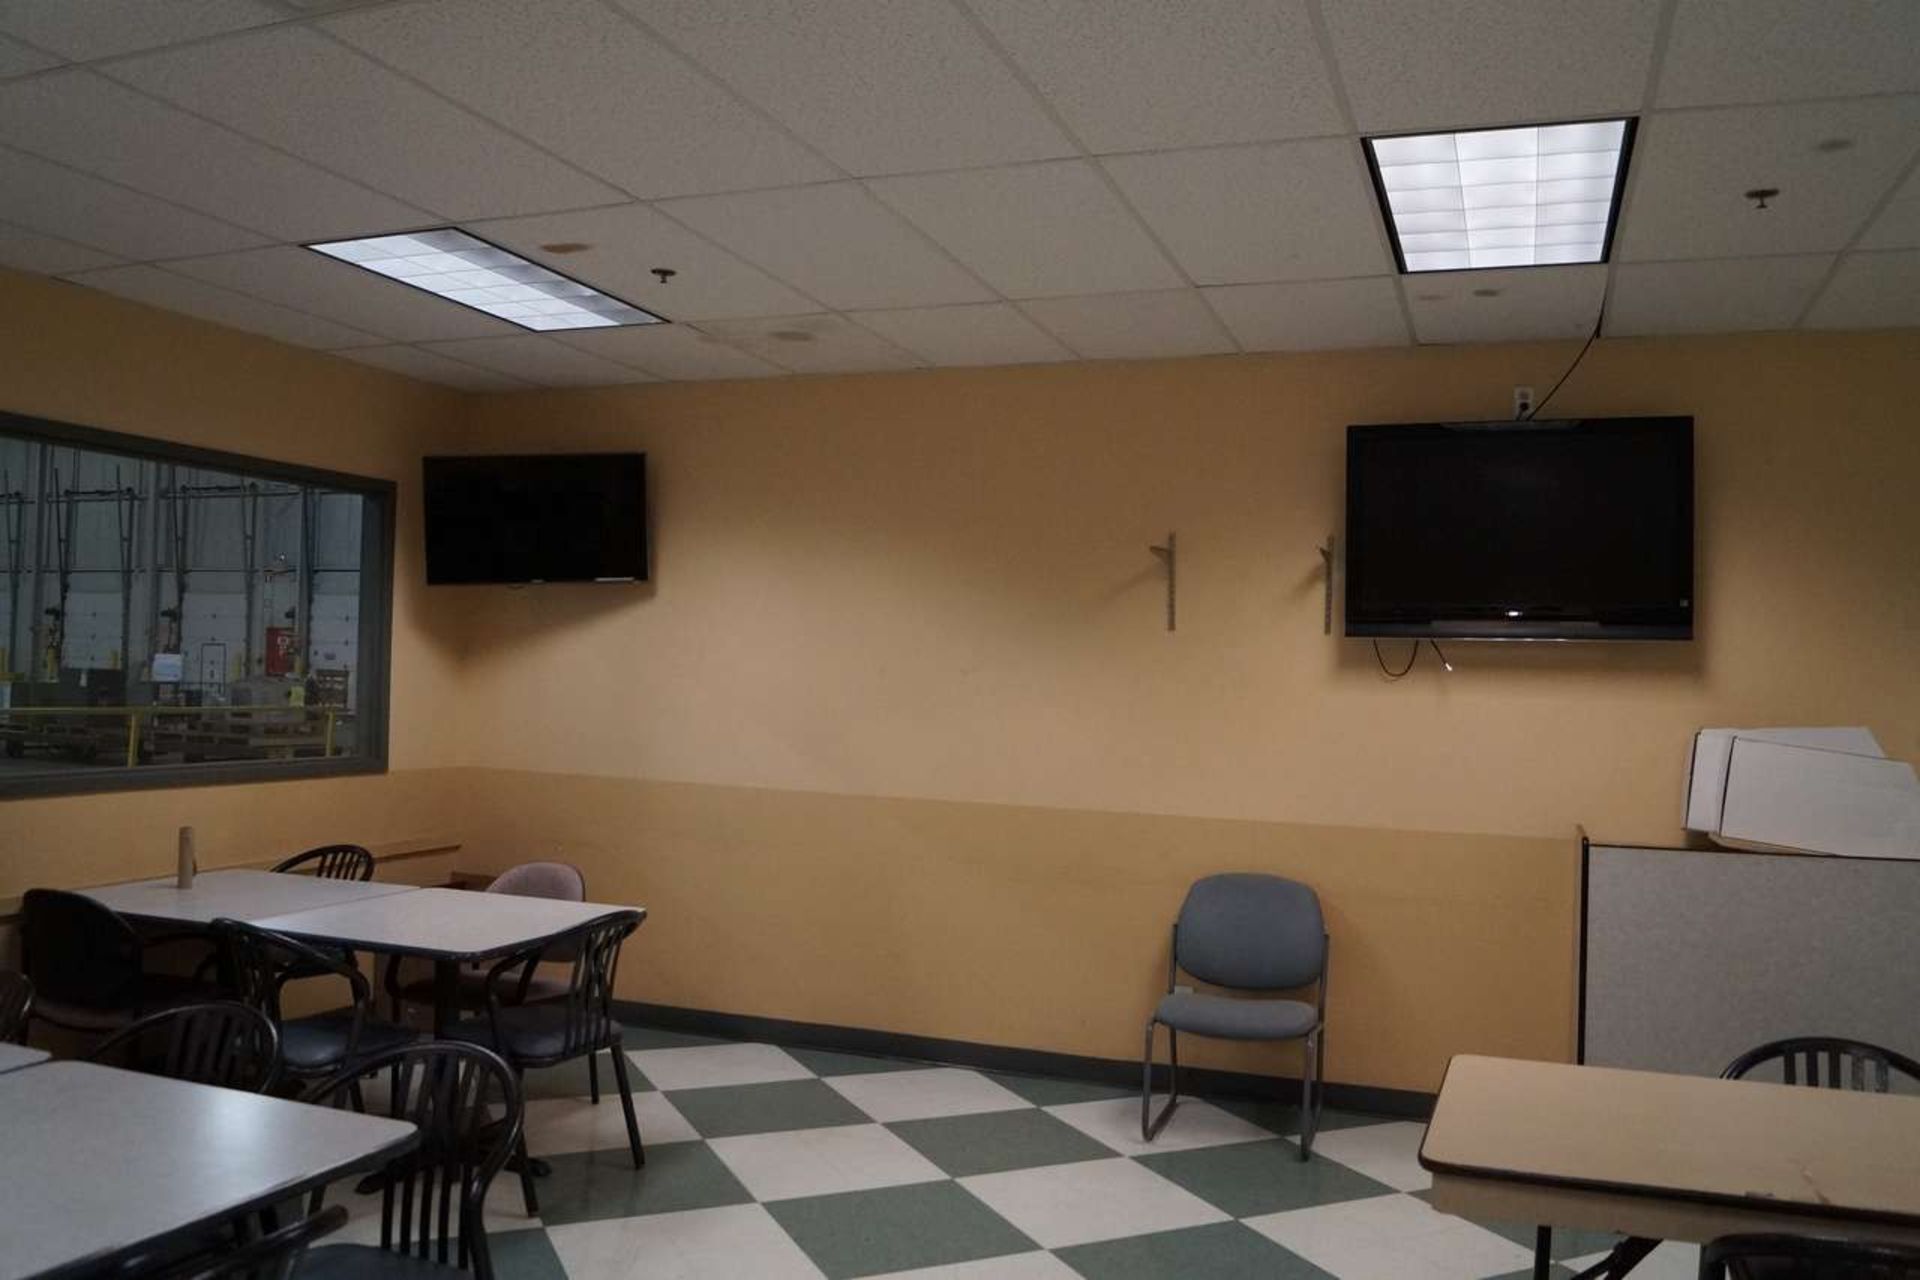 Contents of Cafeteria & Office Area - Image 5 of 14